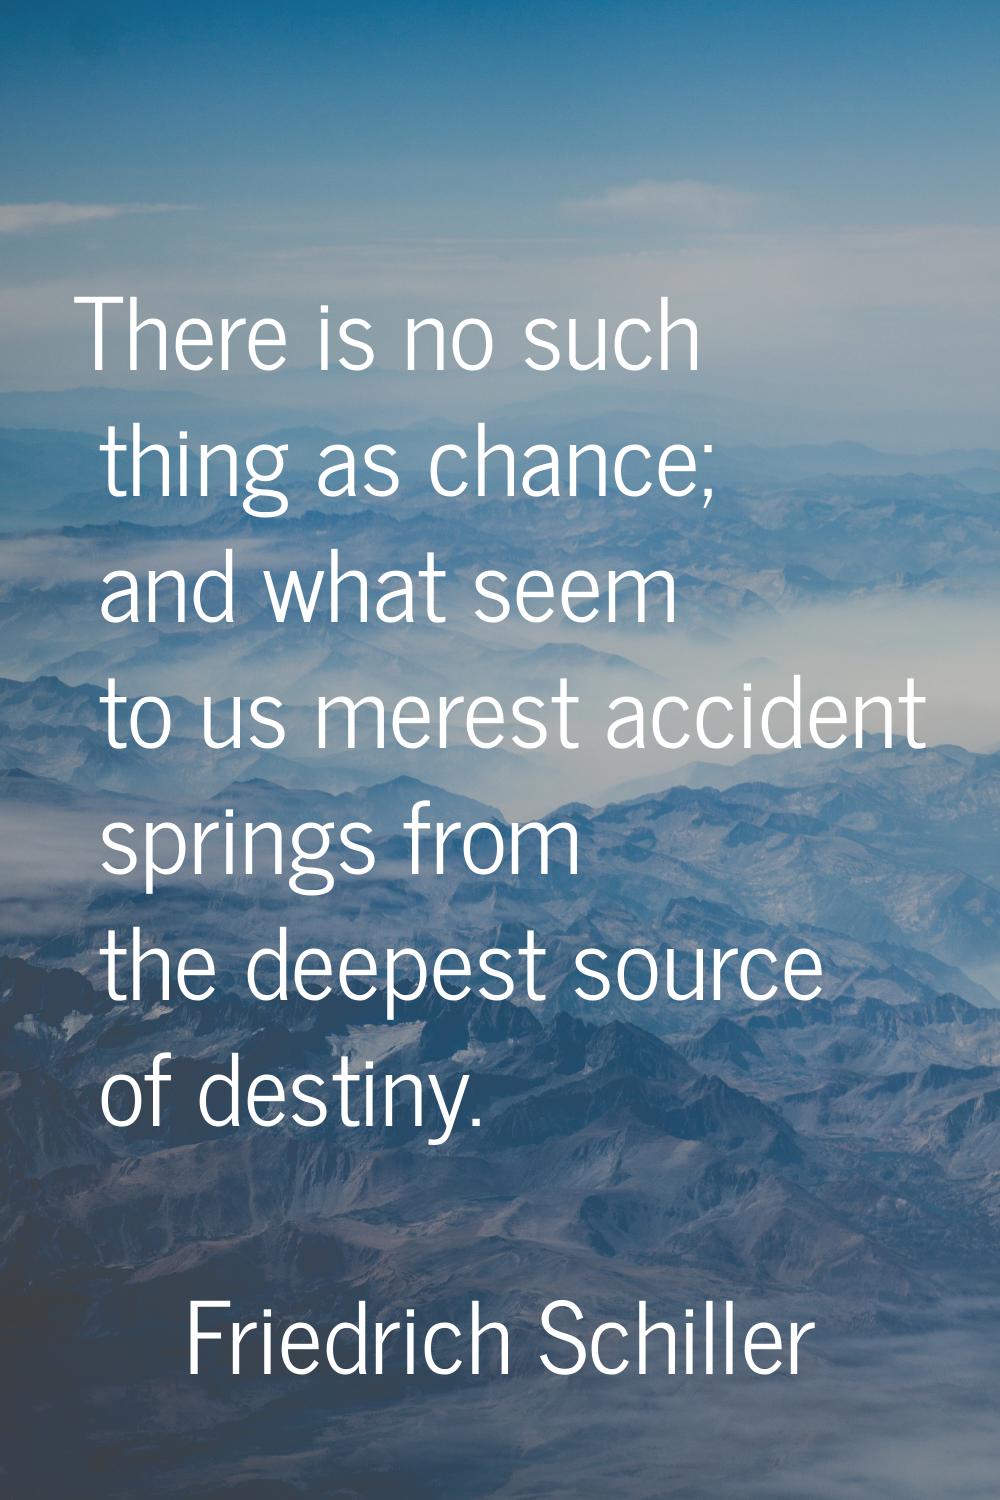 There is no such thing as chance; and what seem to us merest accident springs from the deepest sour